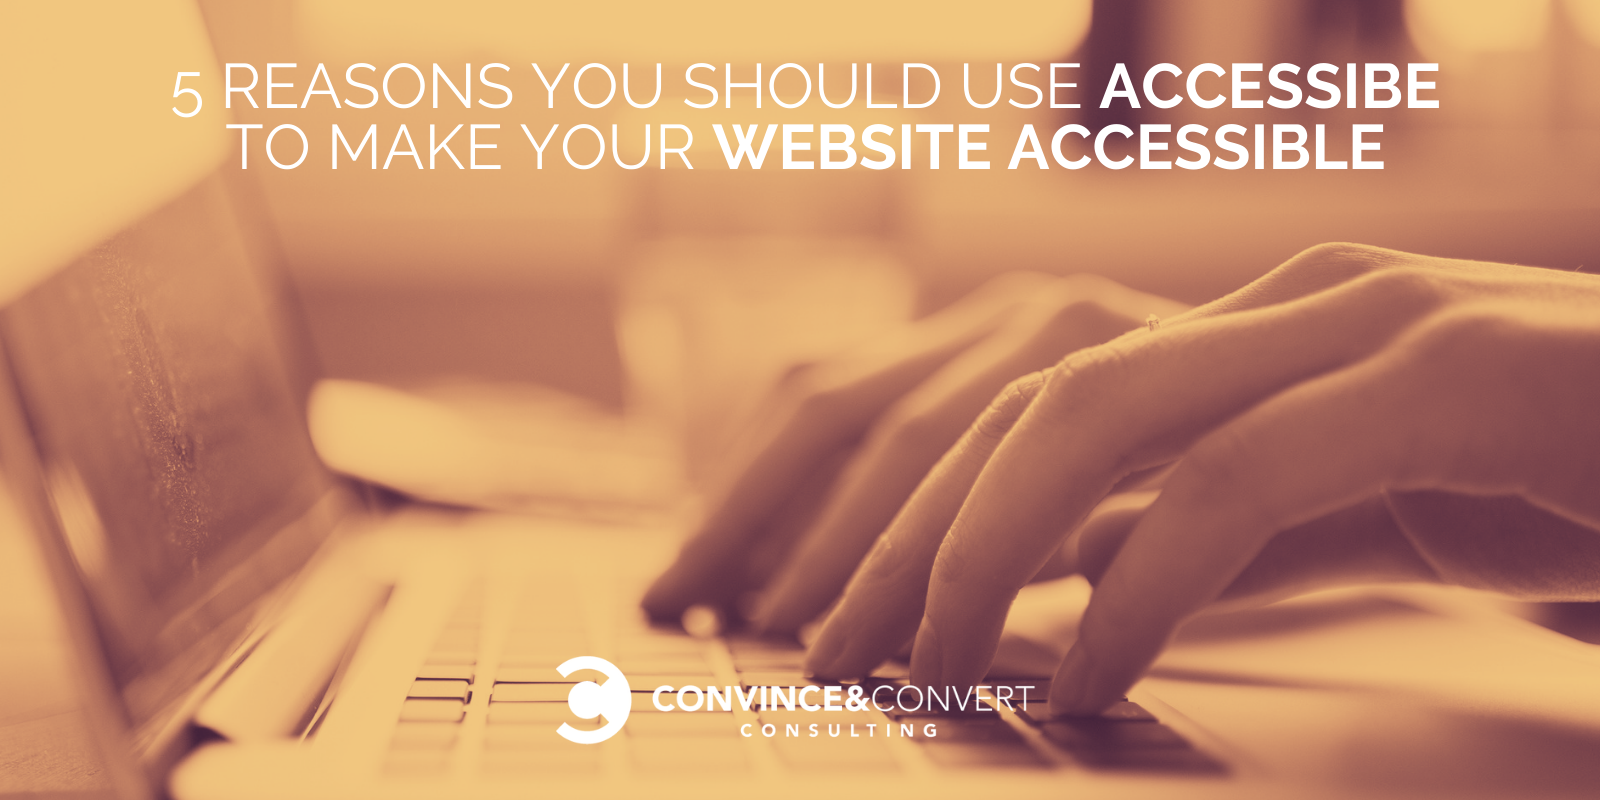 You are currently viewing 5 Reasons to Use accessiBe to Make Your Website Accessible